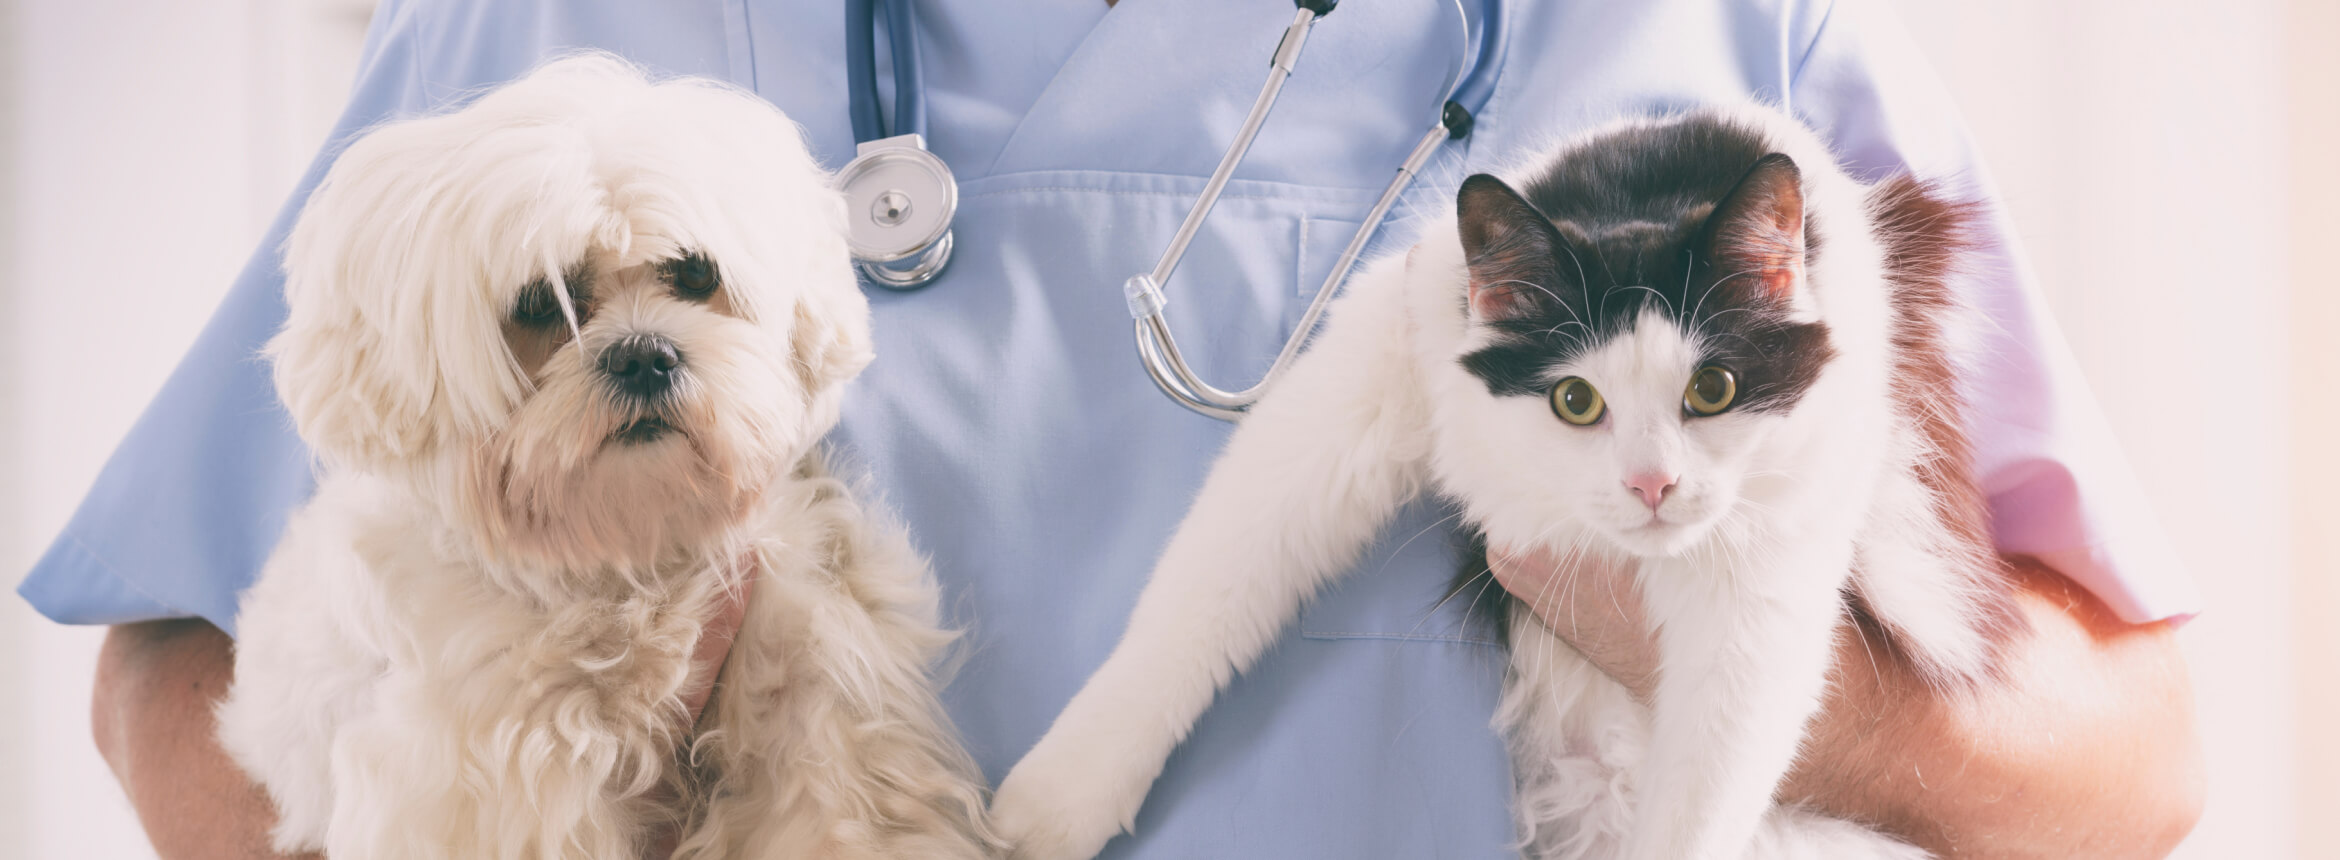 vet holding a dog and a cat